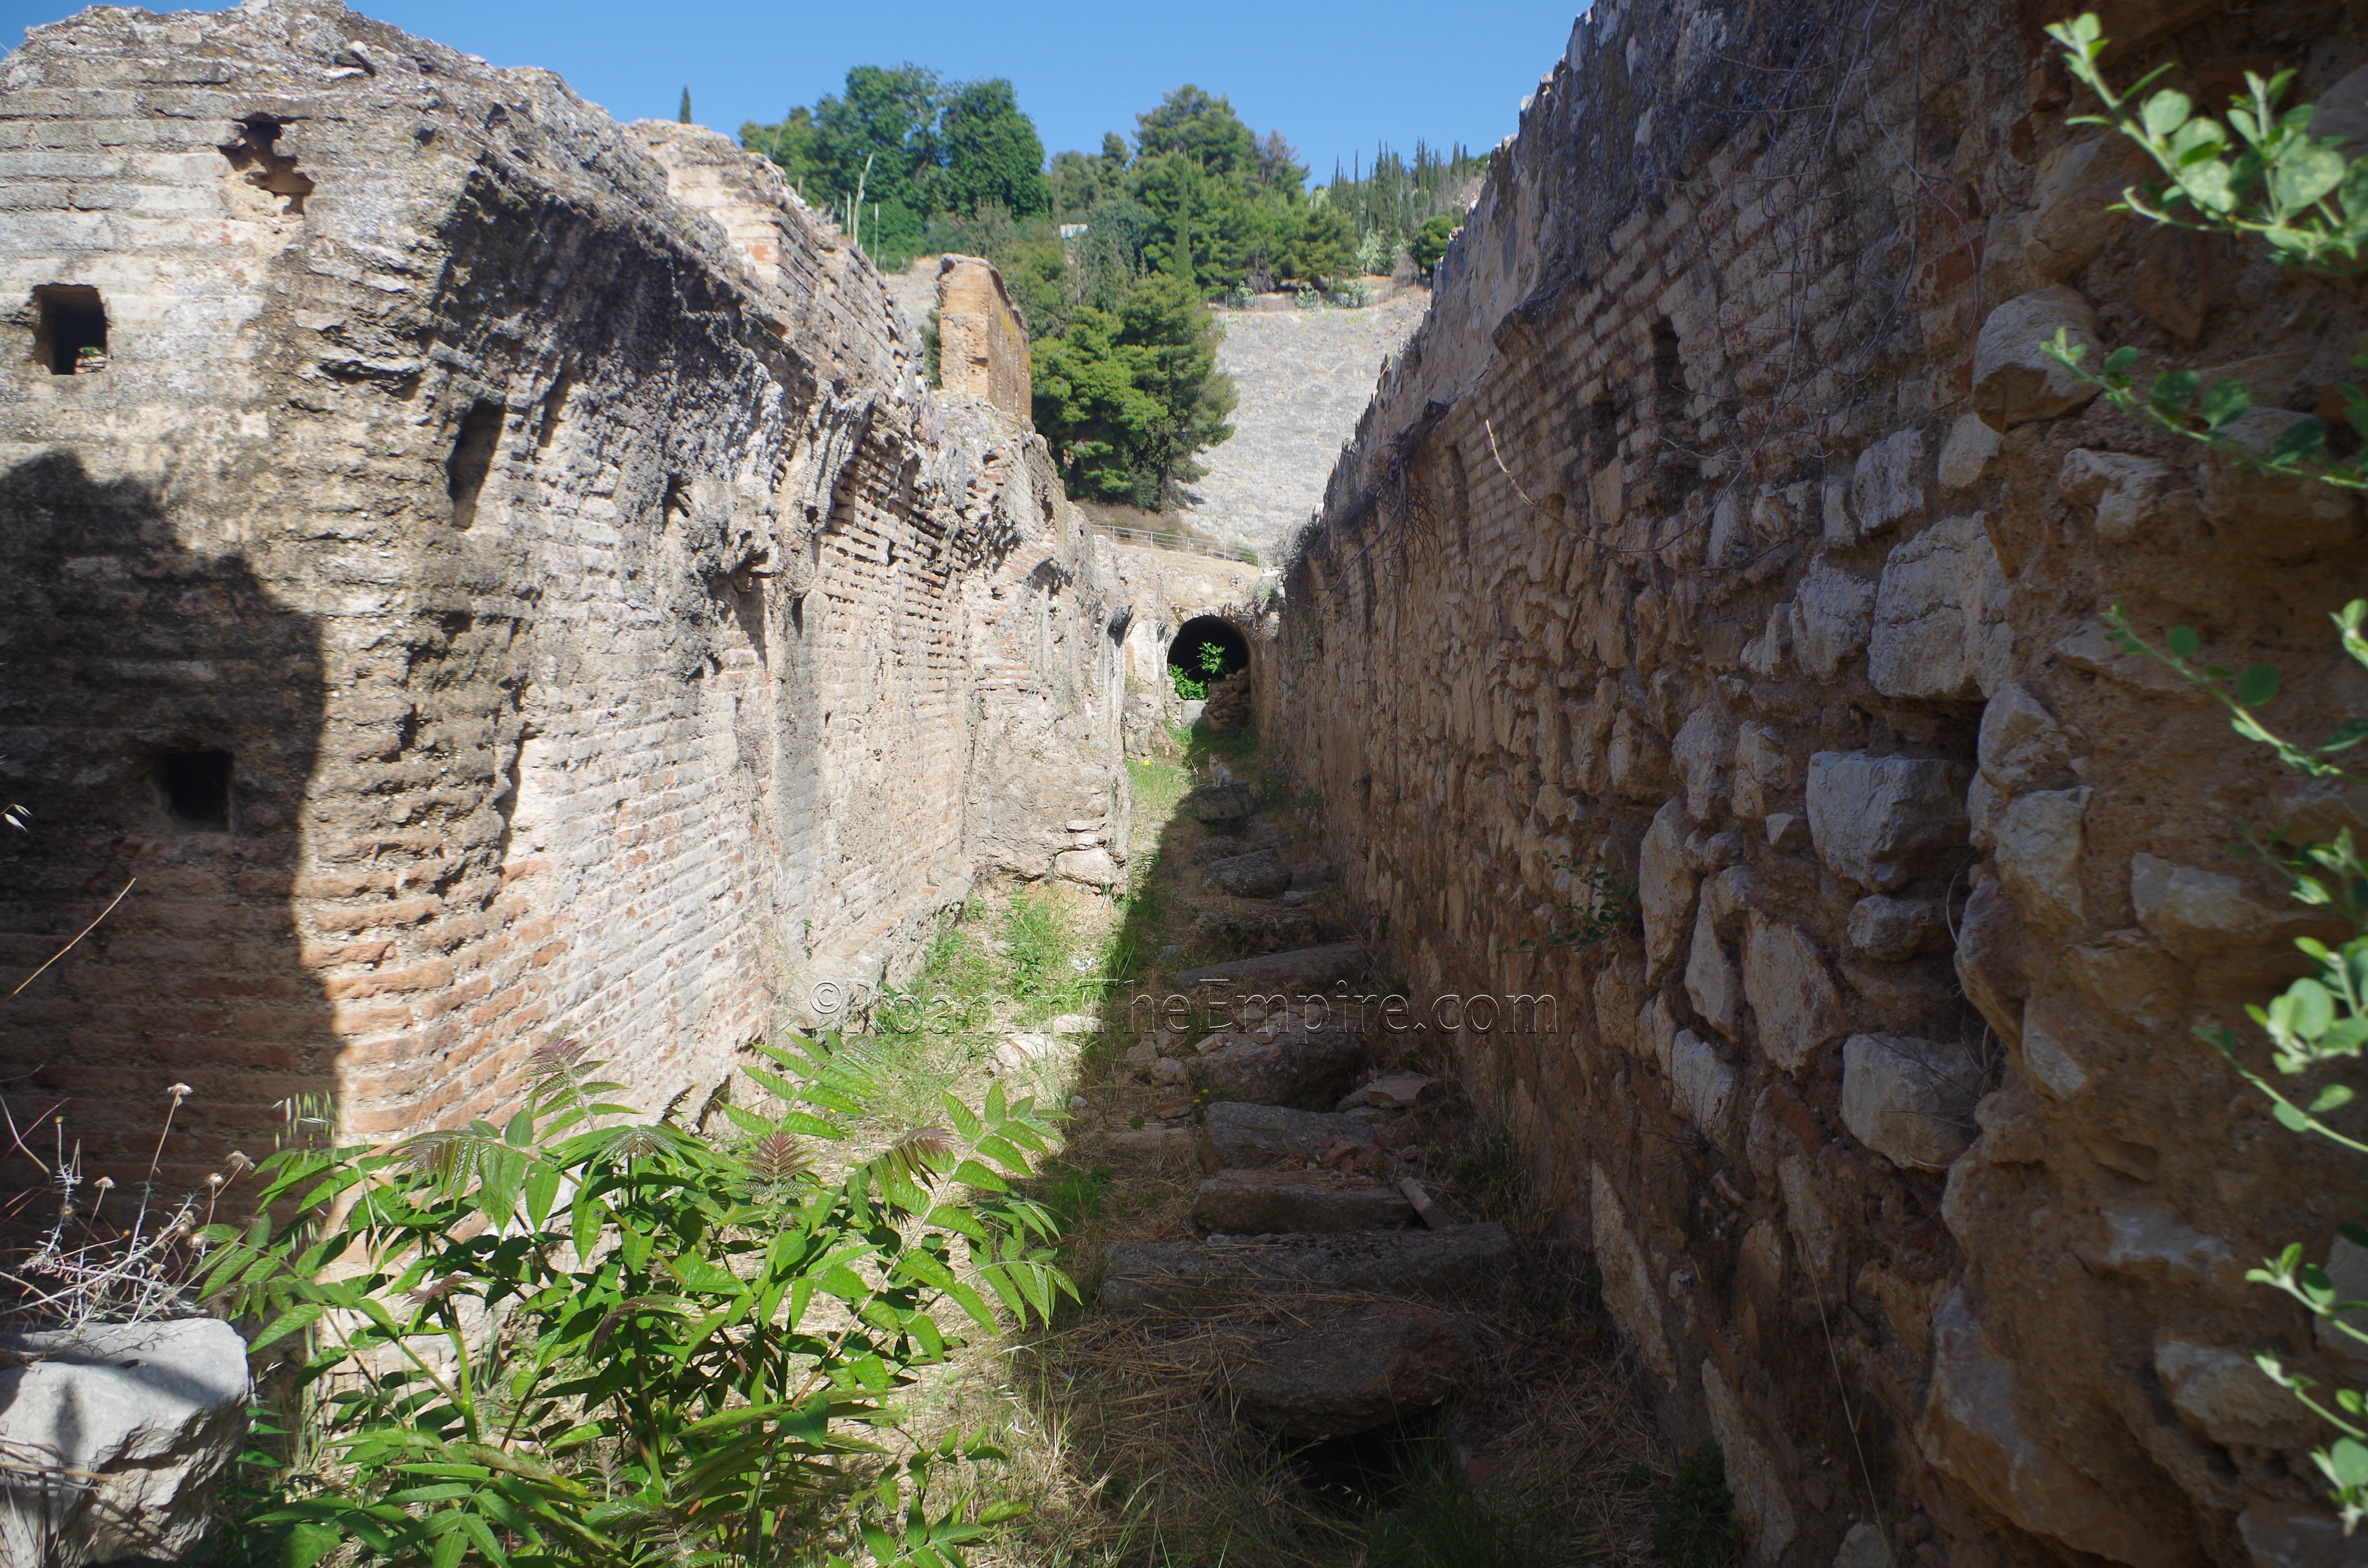 Northern cryptoporticus of the baths.